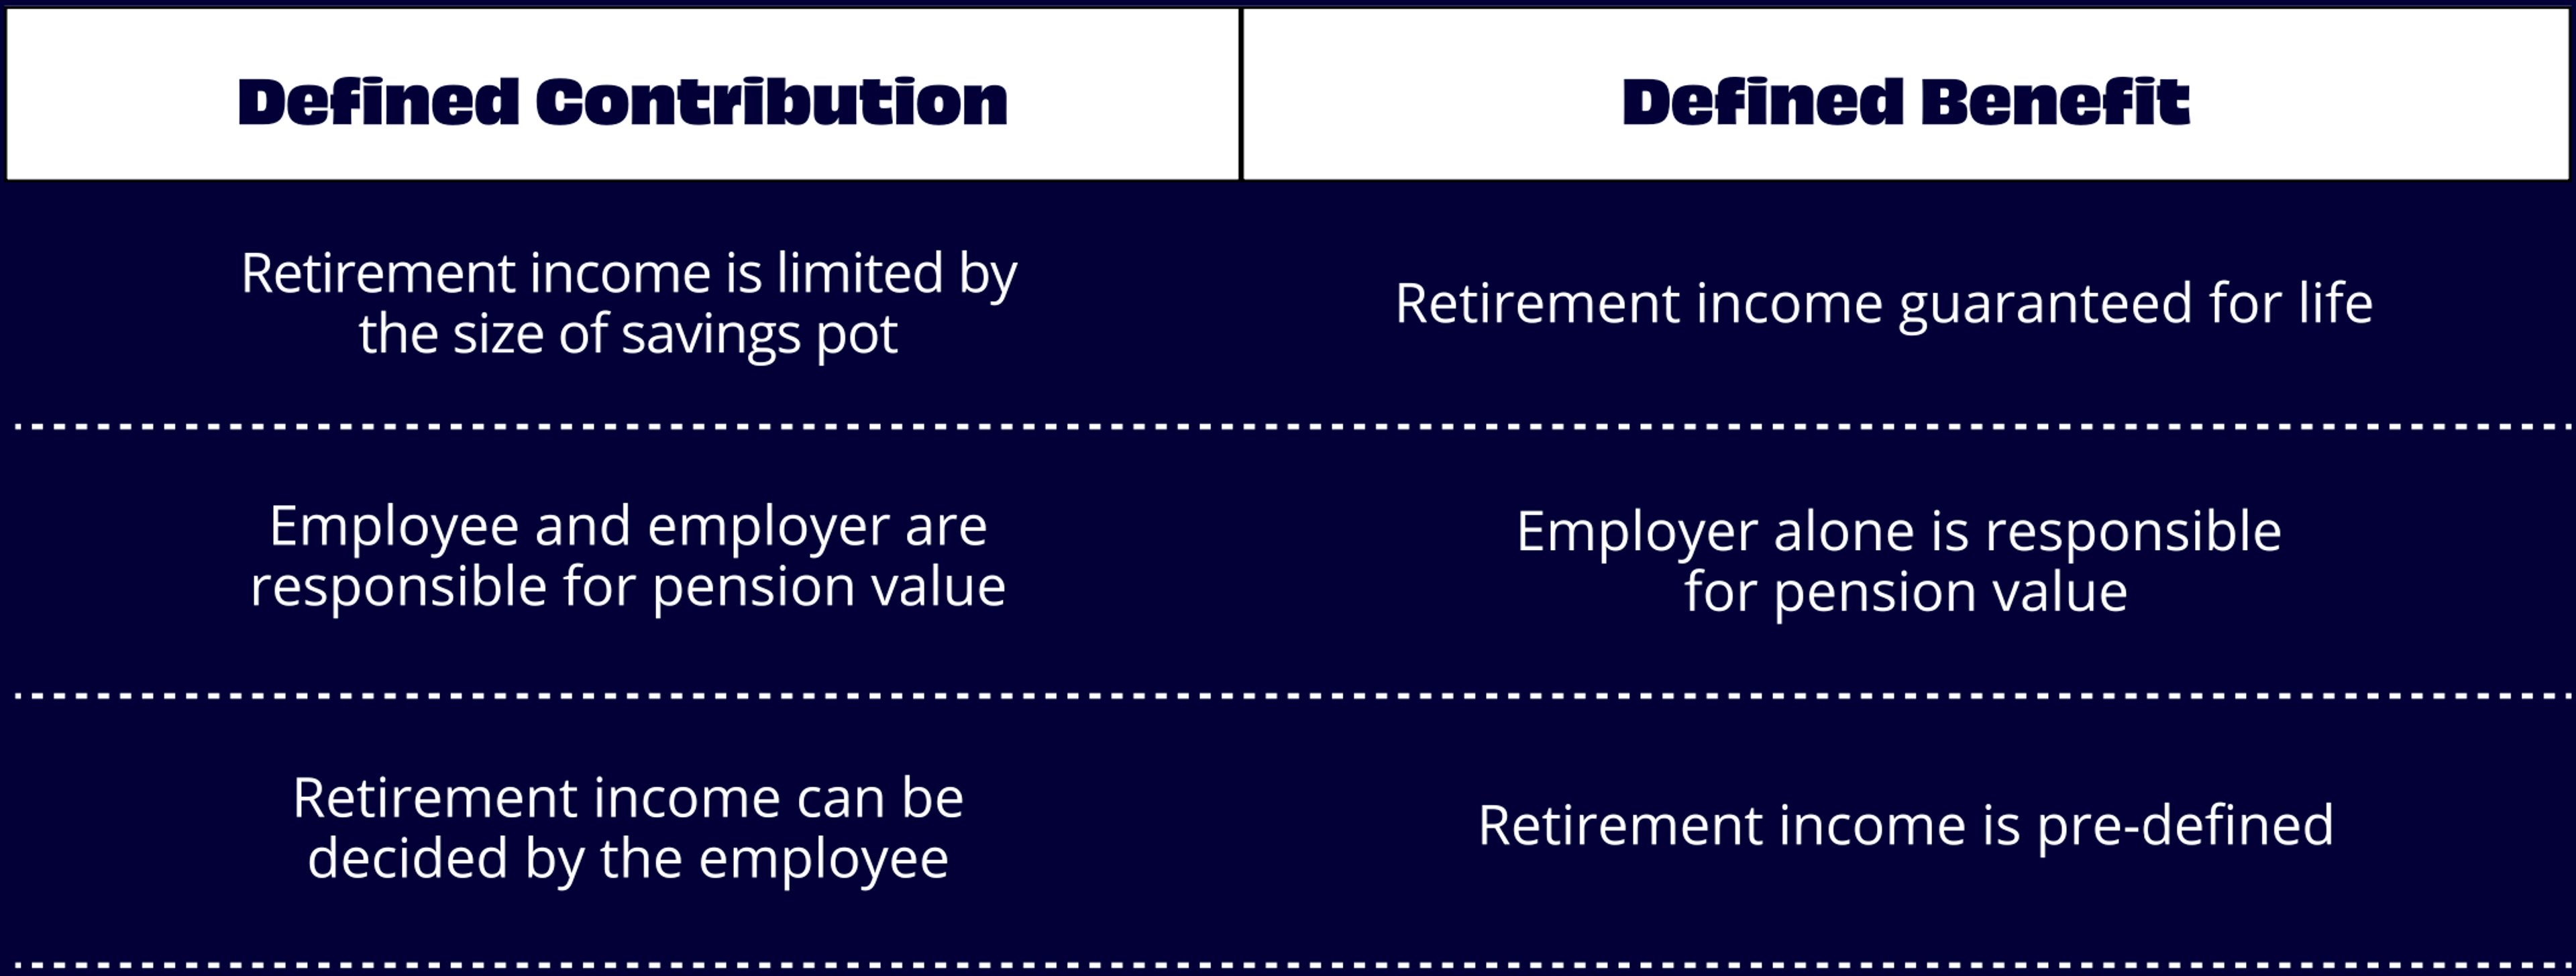 Table showing the differences between defined contribution and benefit pensions